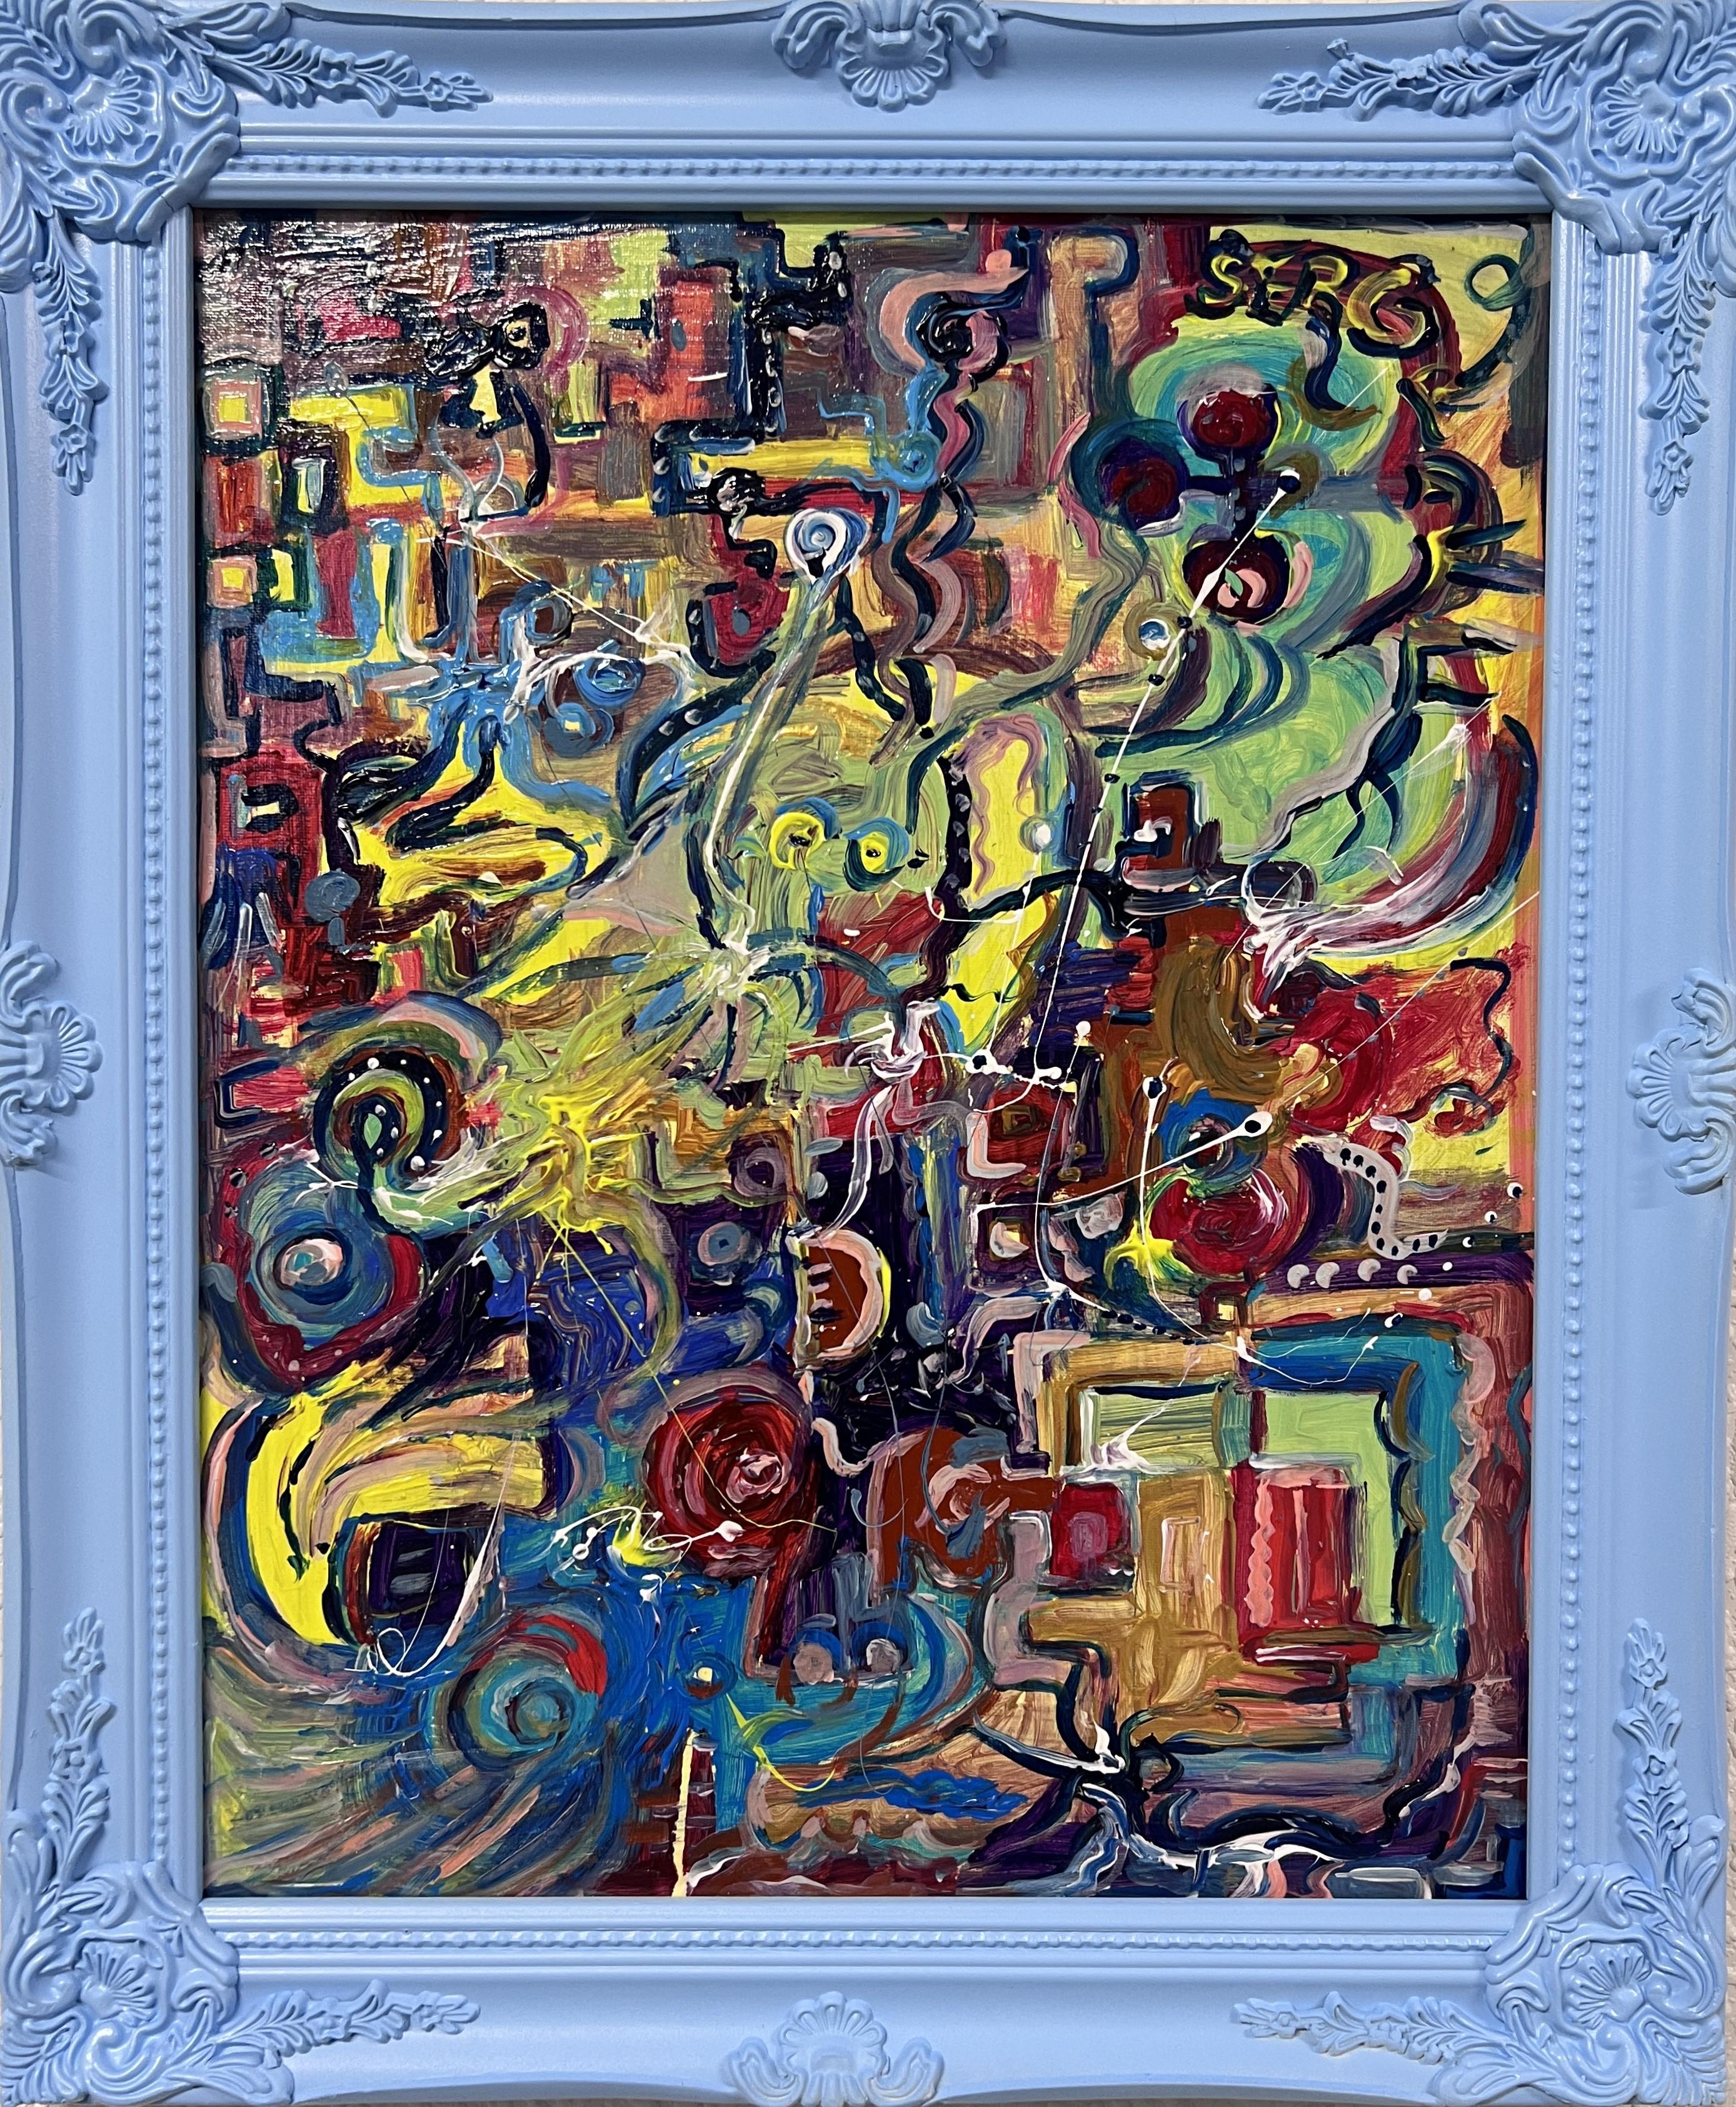 This is a unique original acrylic/oil painting on canvas in a fantasy abstract style by Serg Graff Titled "Optimistic Creativity". 
It comes signed, dated, and with a COA (Certificate of Authenticity). 

Presented in an exclusive blue frame.